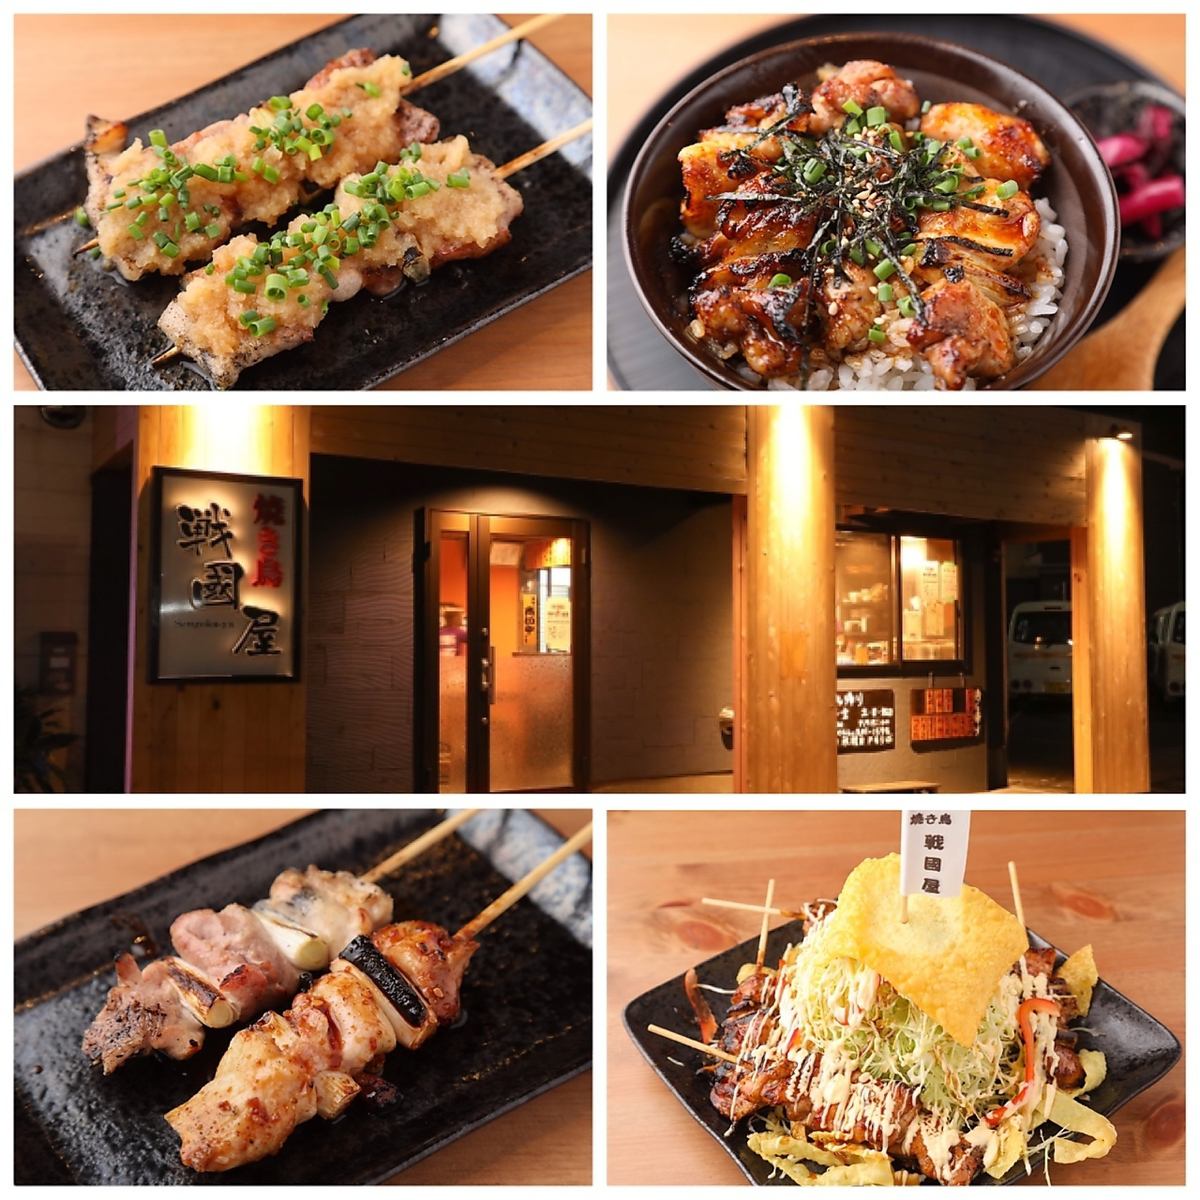 Please enjoy the yakitori and skewers that are carefully handmade one by one.Takeout is also possible ◎